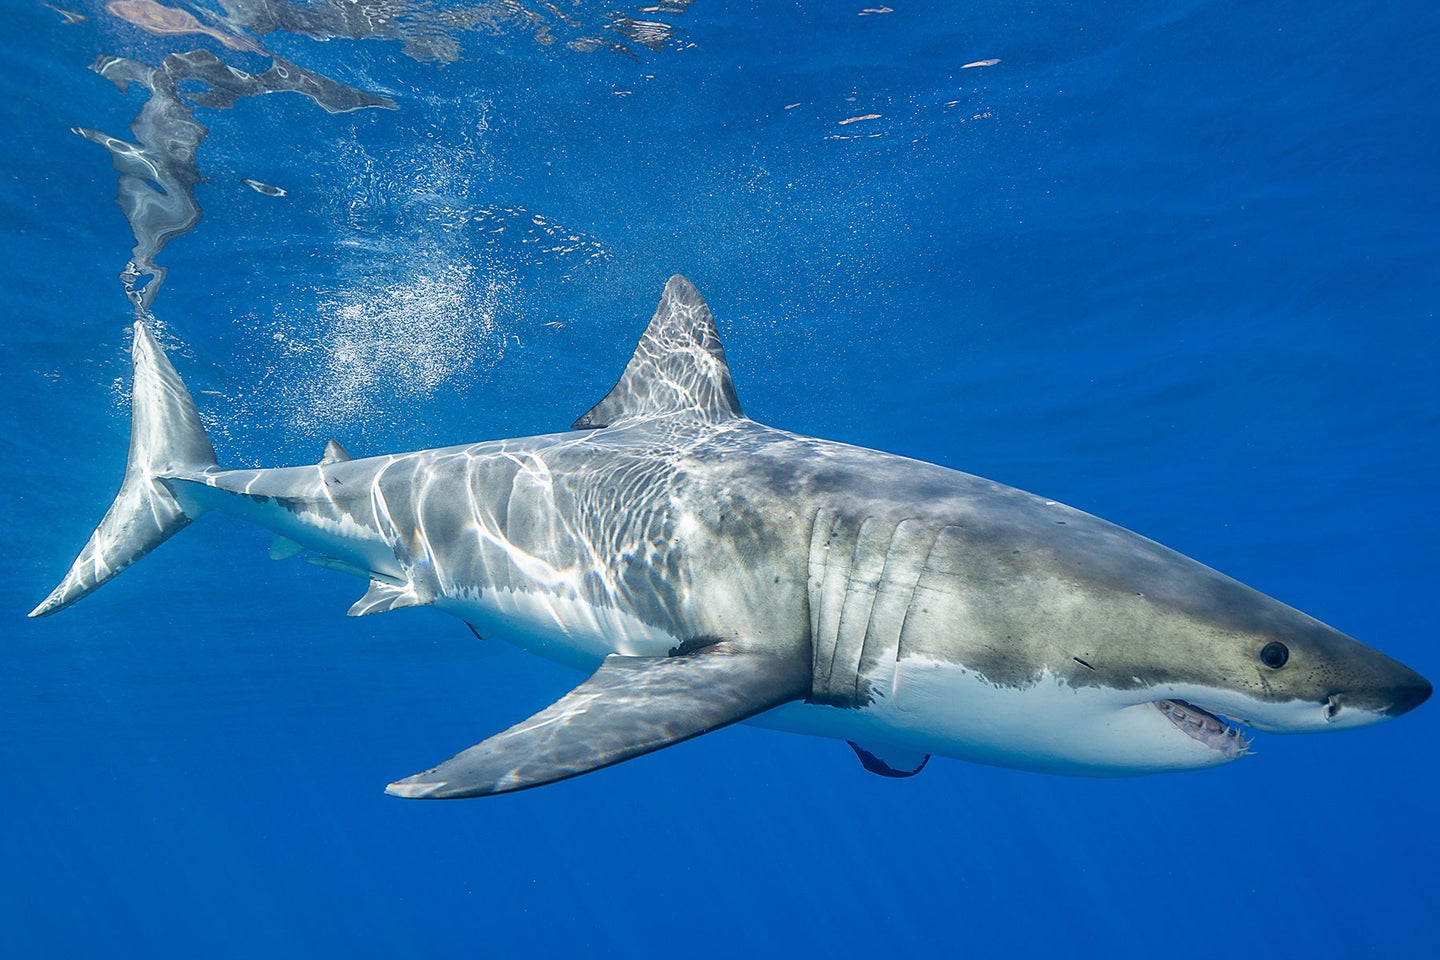 Shark attacks are on the rise in New York state this summer.